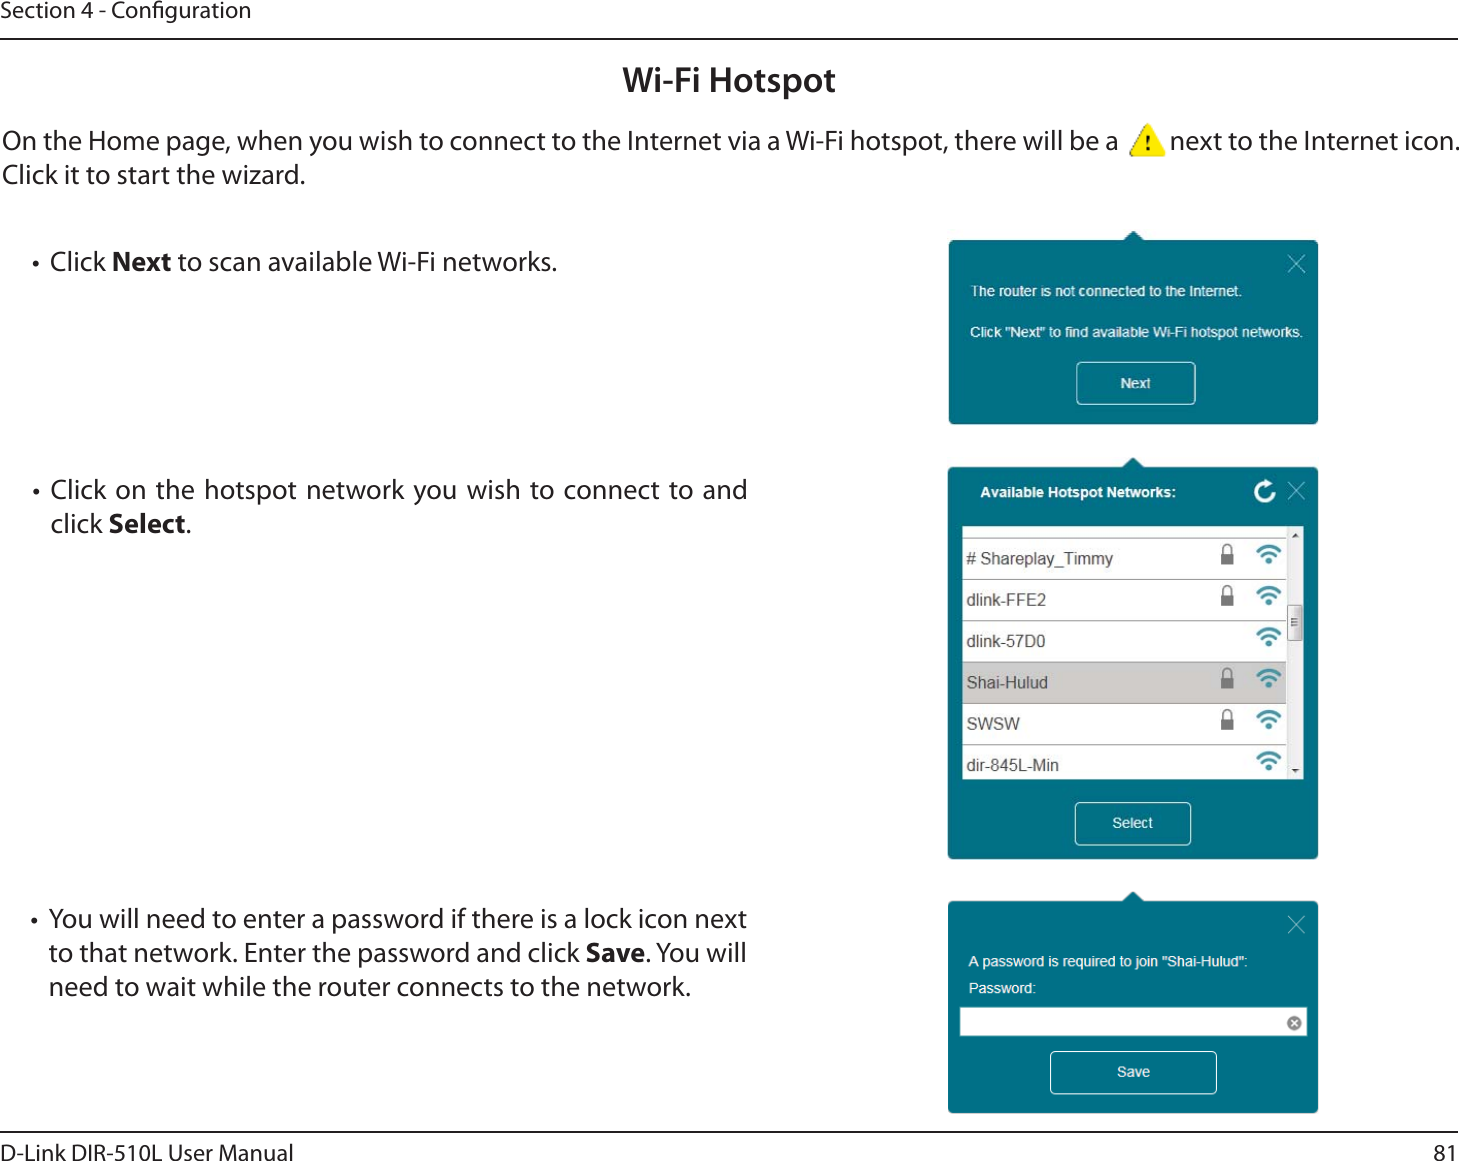 81D-Link DIR-510L User ManualSection 4 - CongurationWi-Fi HotspotOn the Home page, when you wish to connect to the Internet via a Wi-Fi hotspot, there will be a  next to the Internet icon. Click it to start the wizard.t Click Next to scan available Wi-Fi networks.t Click on the hotspot network you wish to connect to and click Select.t You will need to enter a password if there is a lock icon next to that network. Enter the password and click Save. You will need to wait while the router connects to the network.